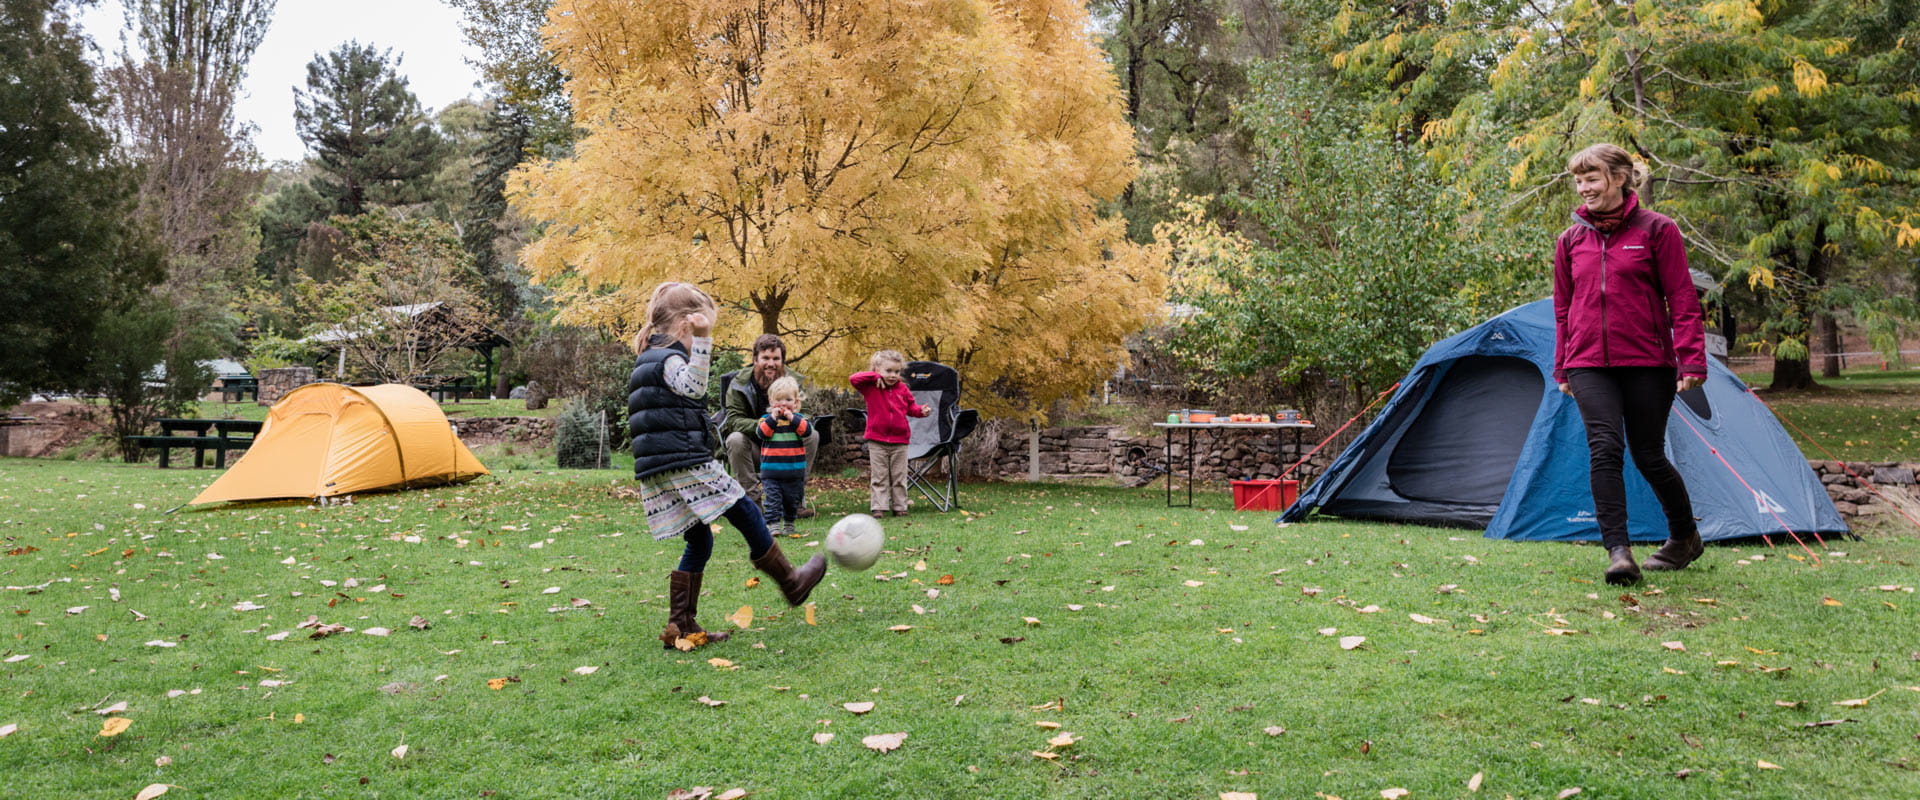 A young girl kicks a socccer ball to her mother while her family watches from their camping site amongst trees with golden and green folliage.